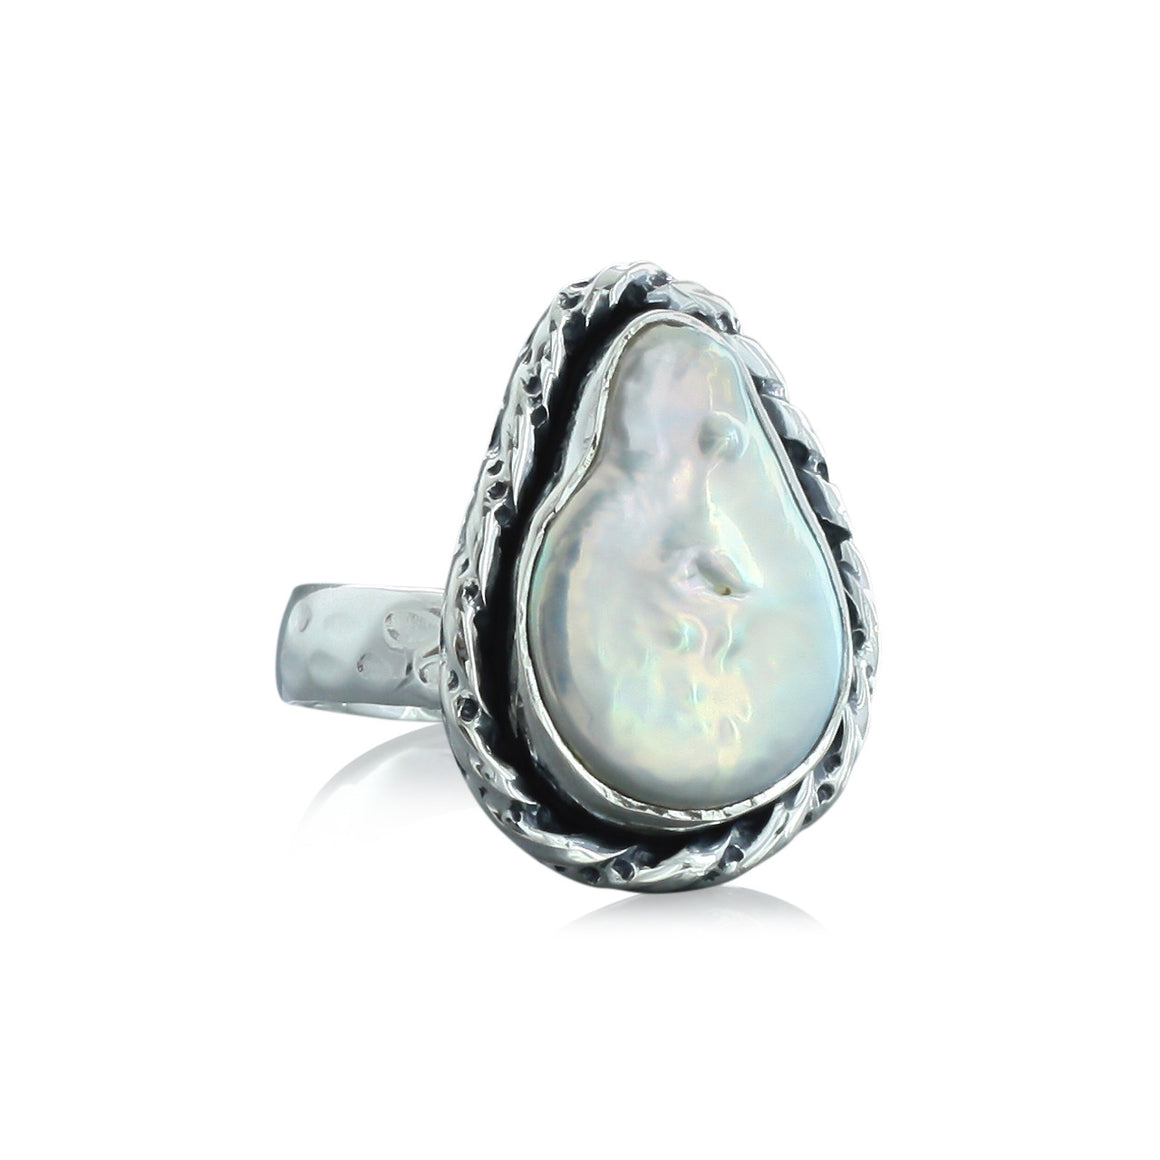 White Pearl Ring - One of a Kind